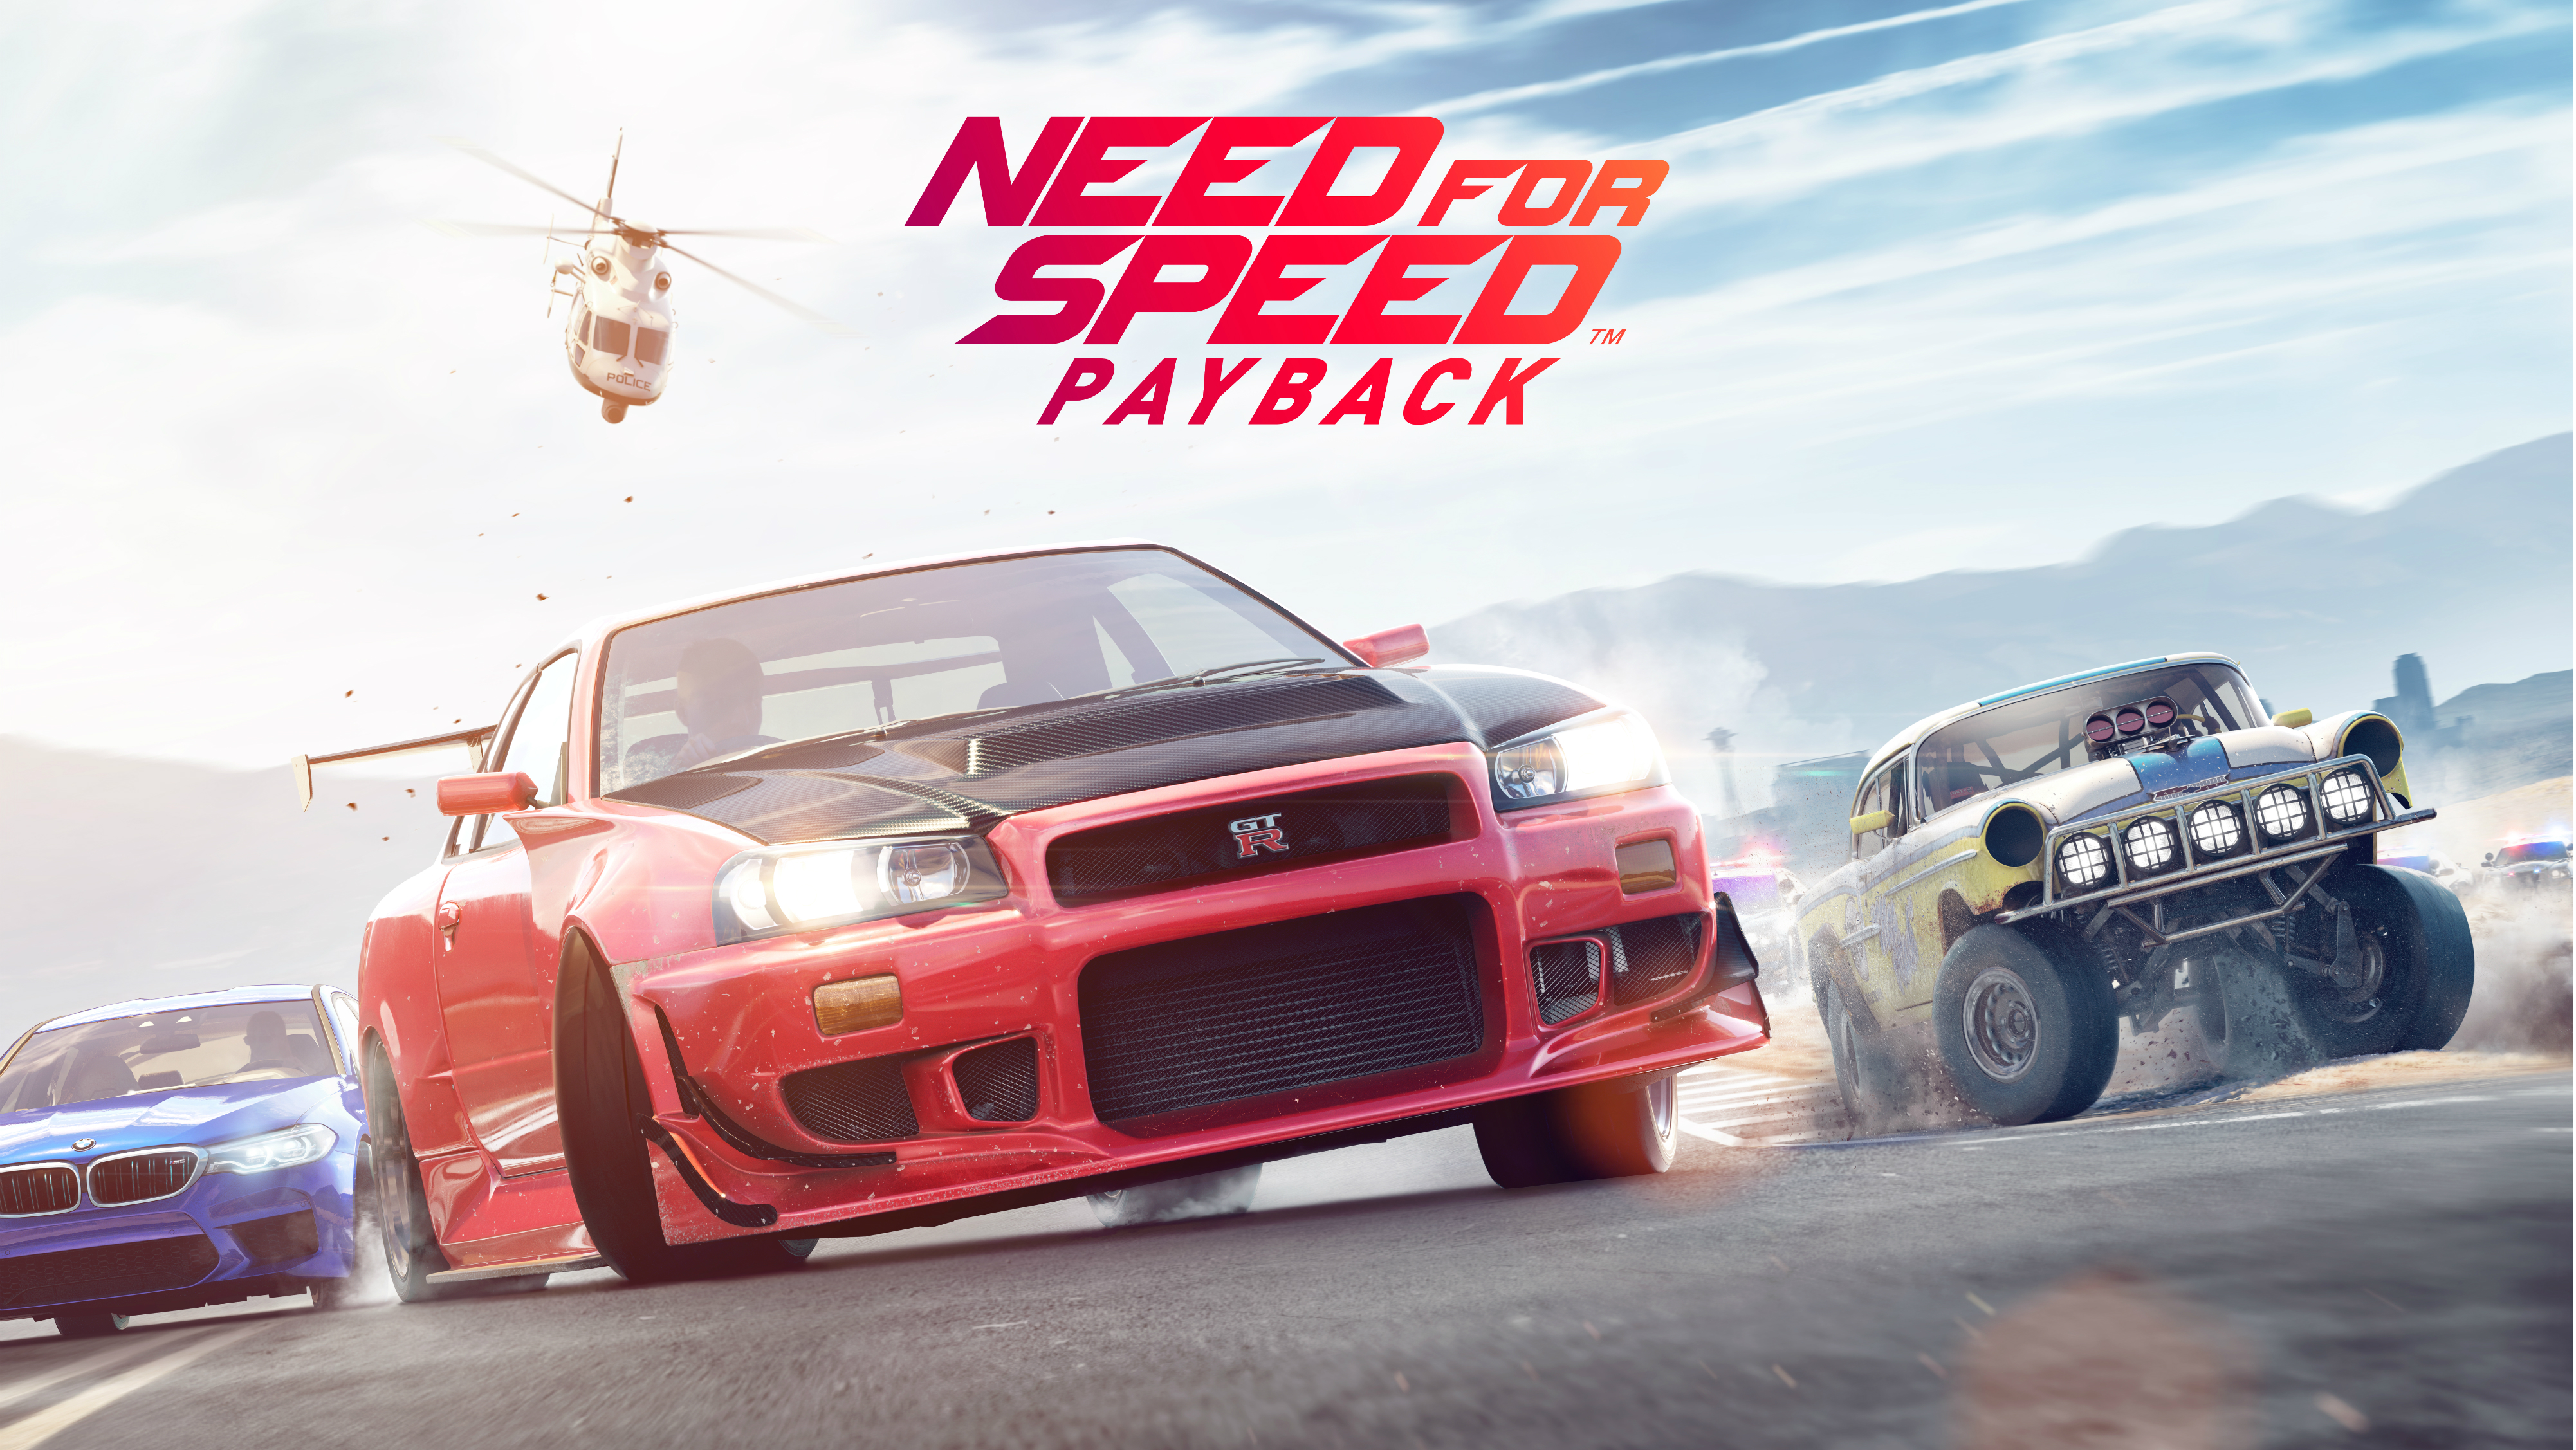 need for speed edge download mac